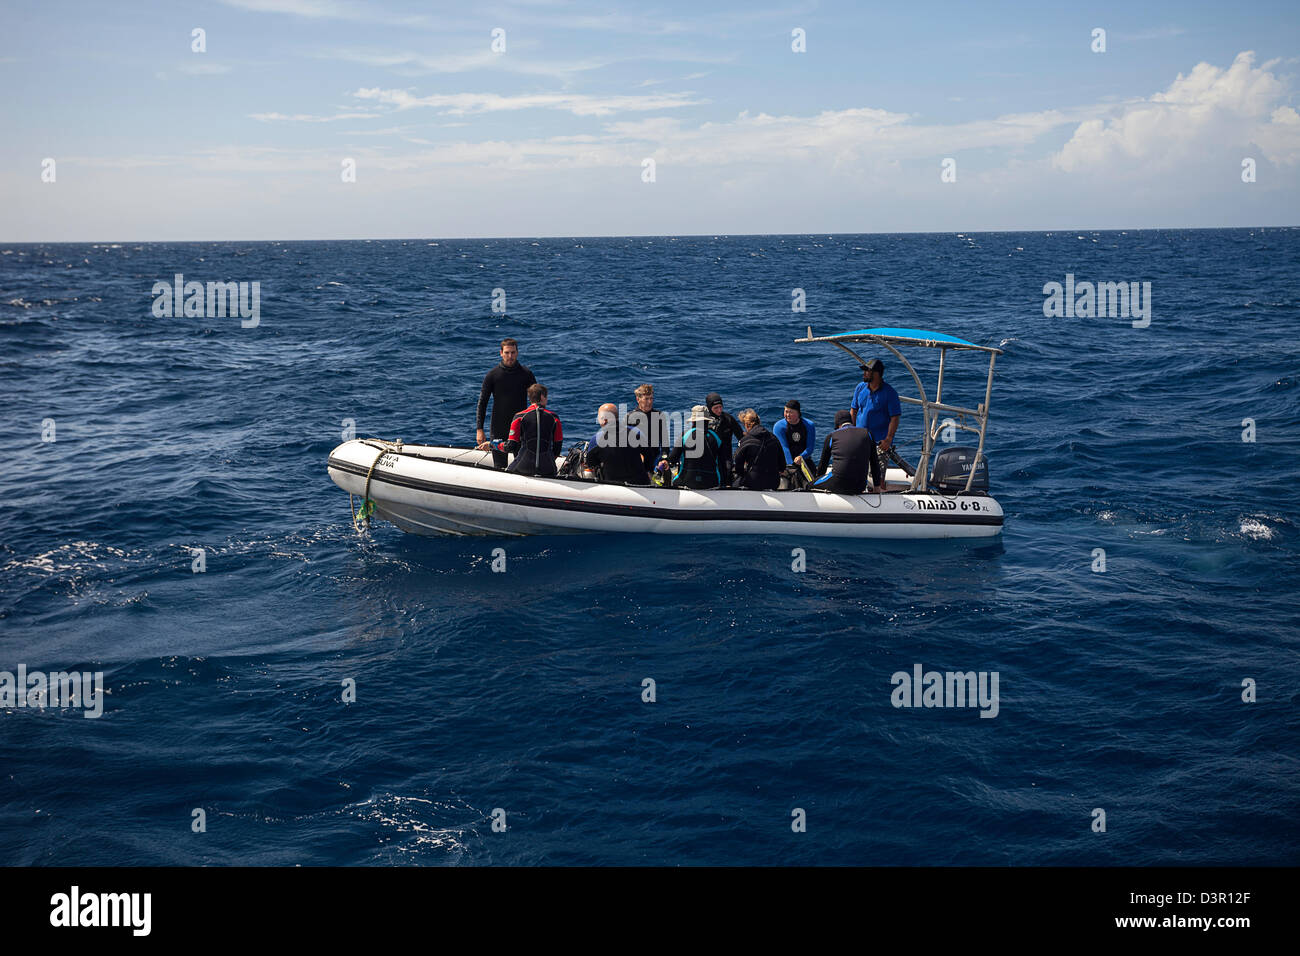 Divers on a hard bottom inflatable leave the live-aboard vessel Nai'a on thier way to a dive site in Fiji. Stock Photo